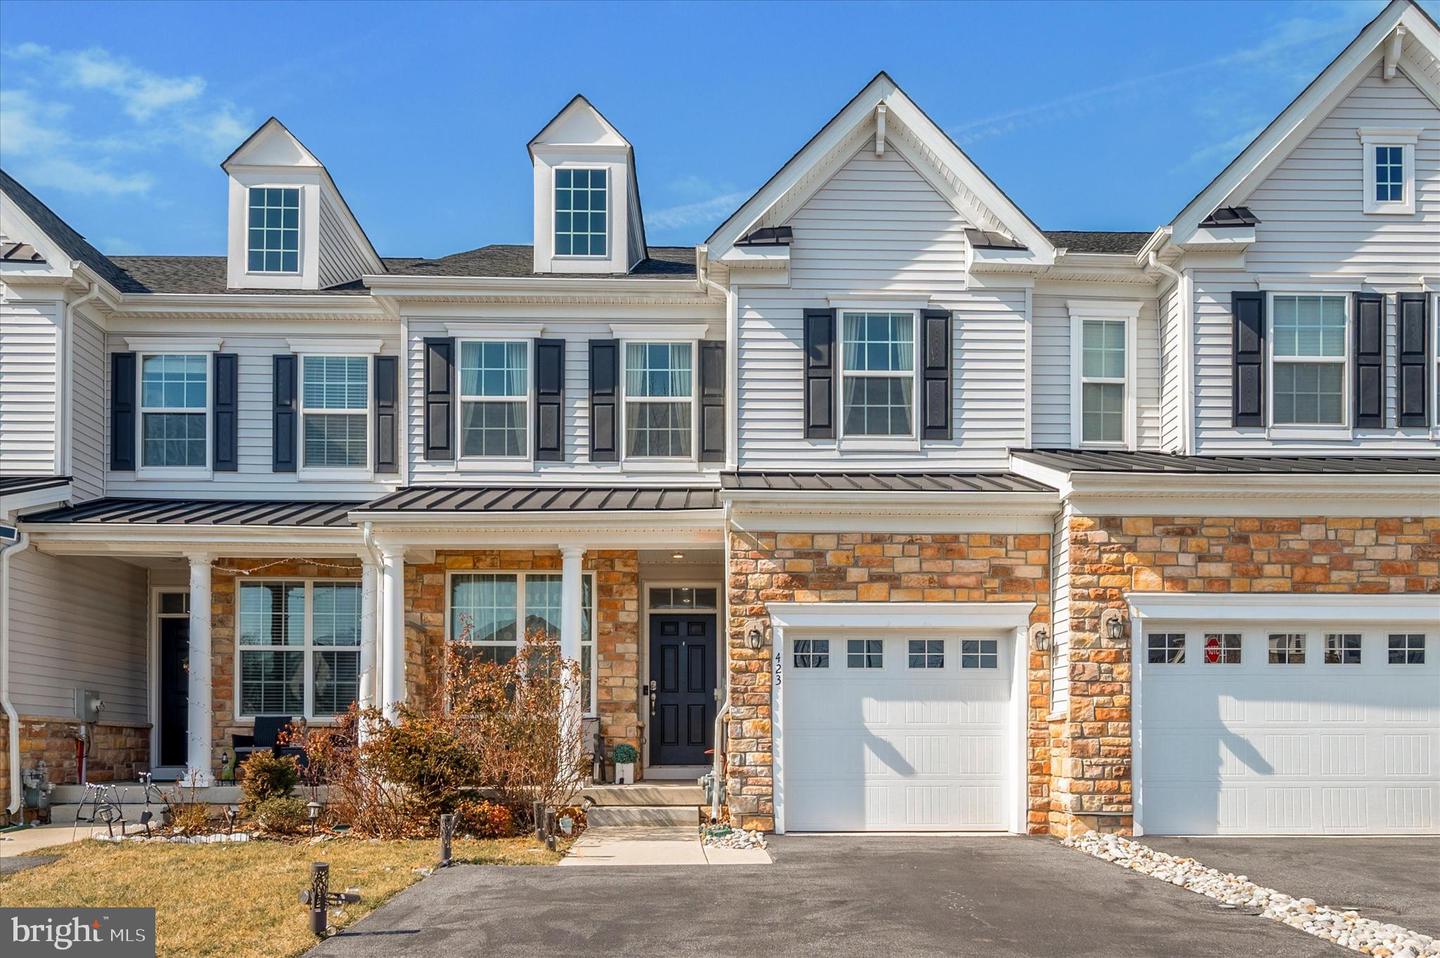 View Phoenixville, PA 19460 townhome